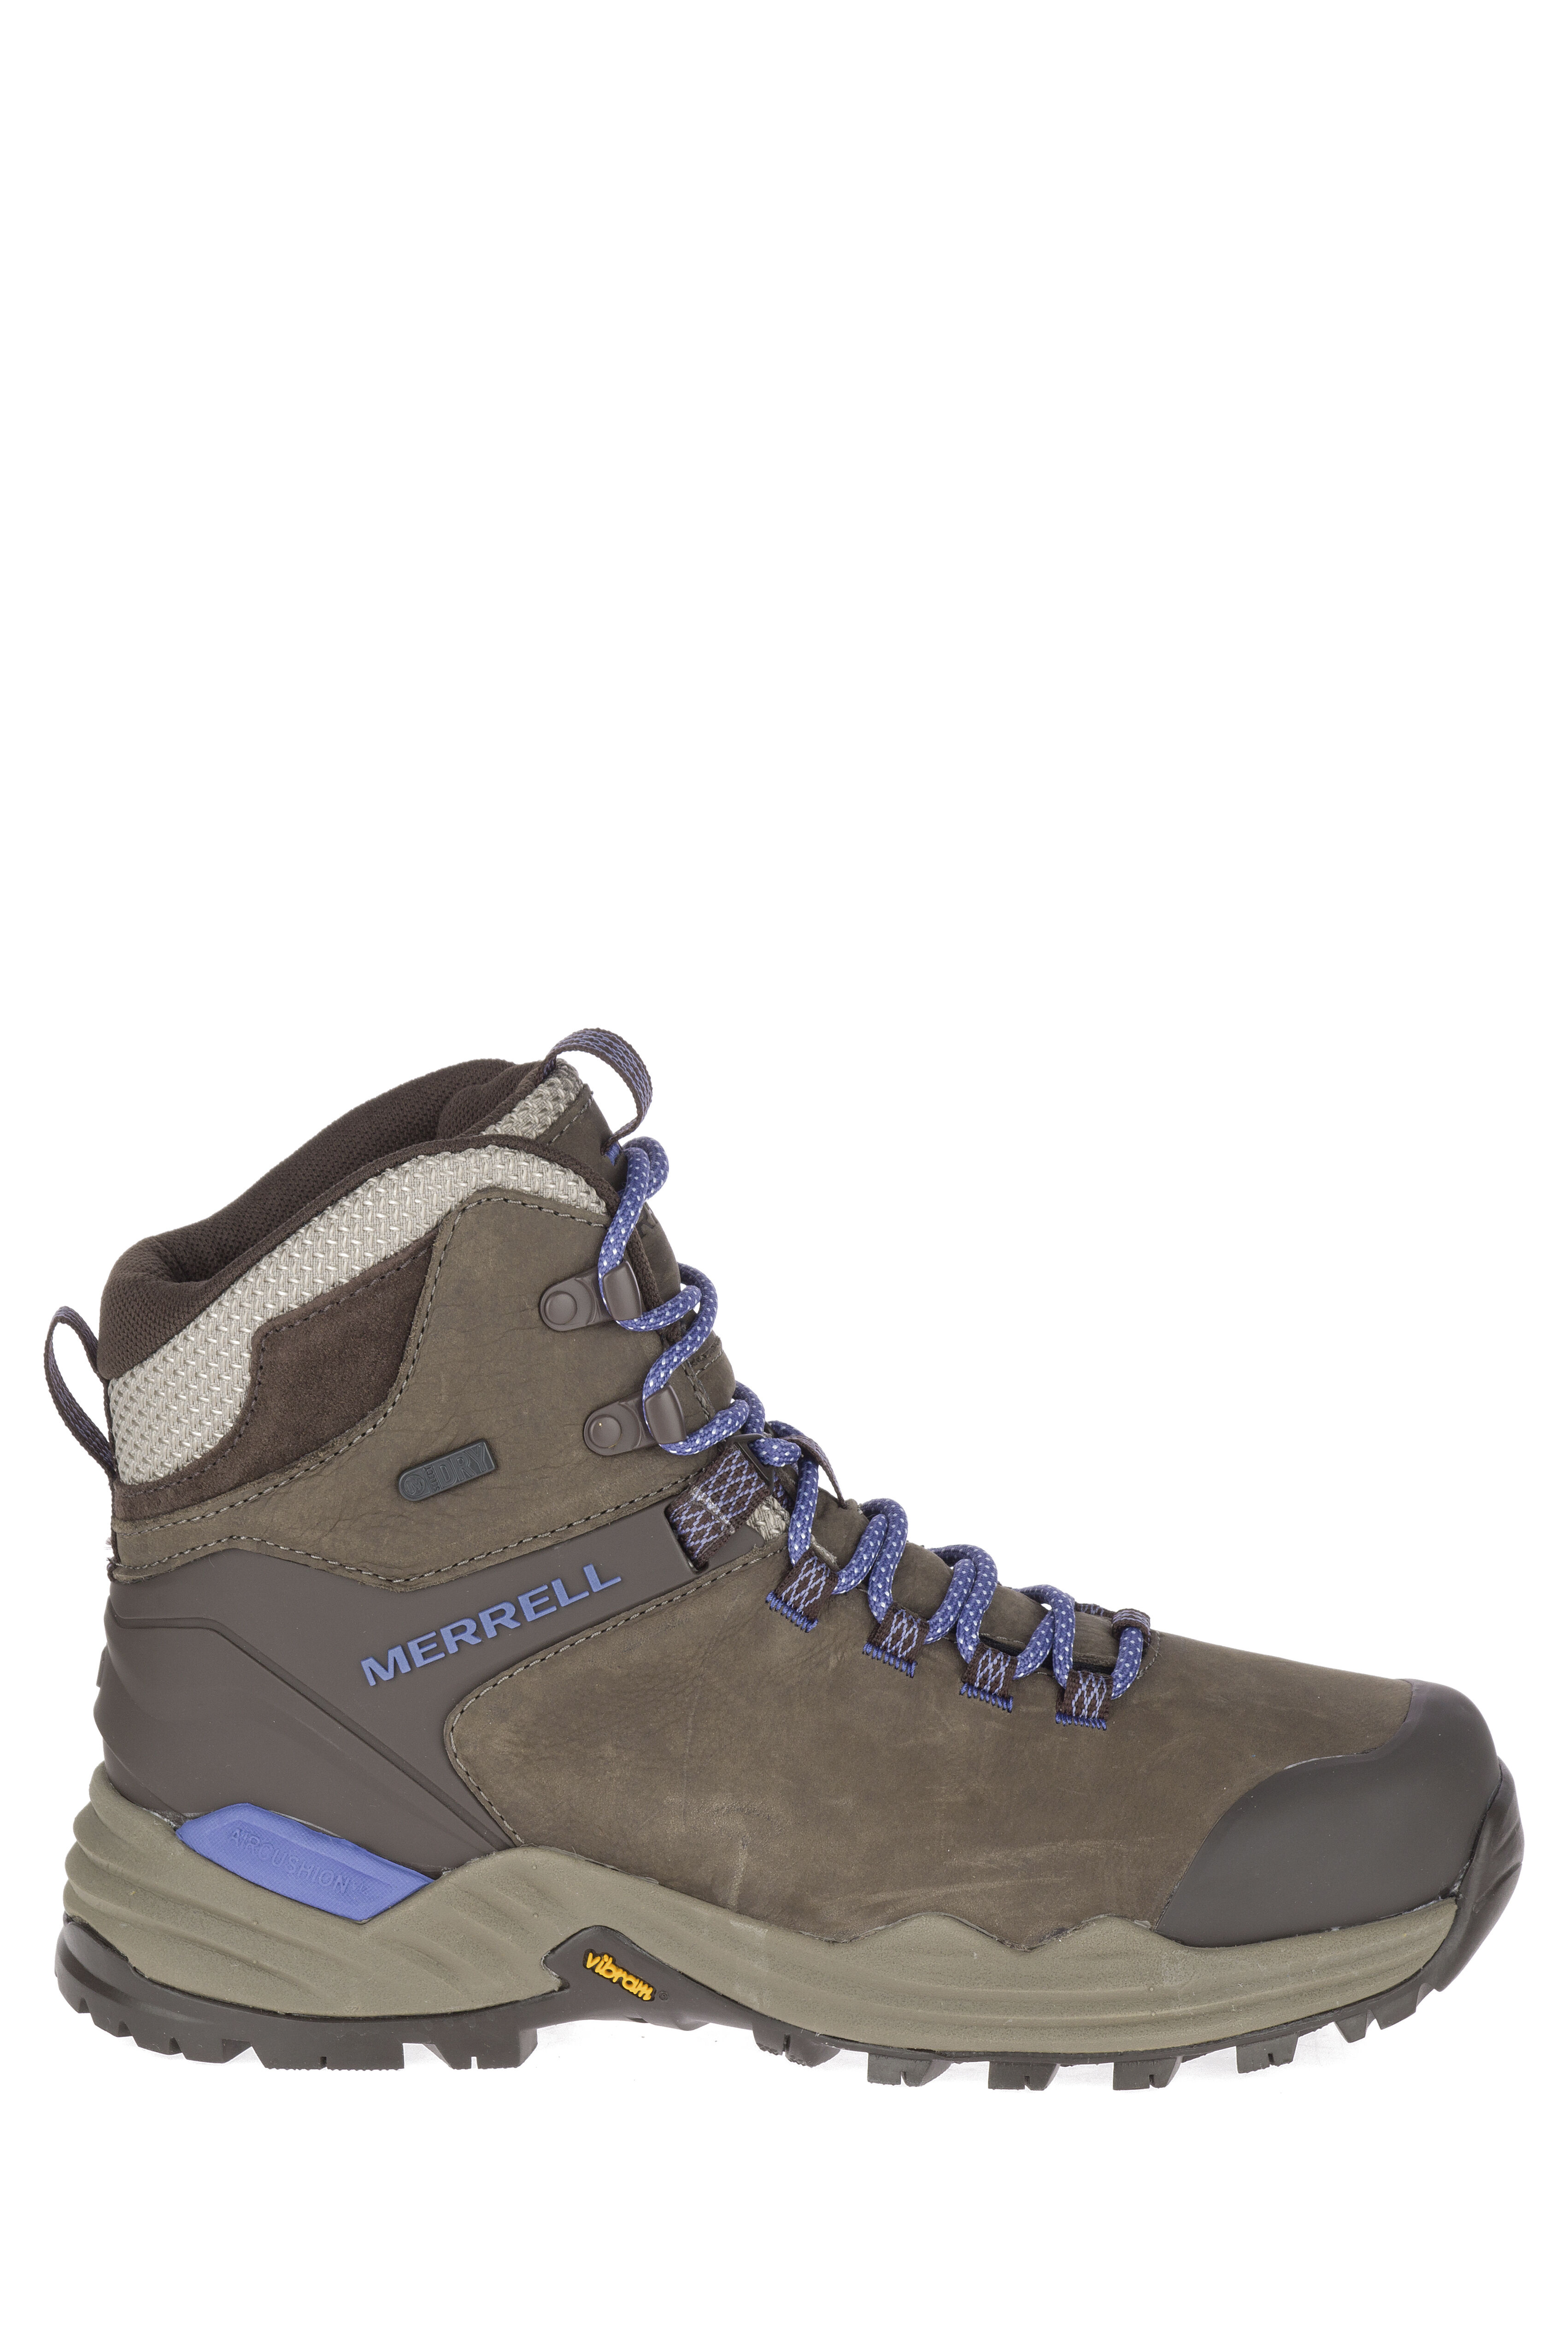 merrell phaserbound work boot review